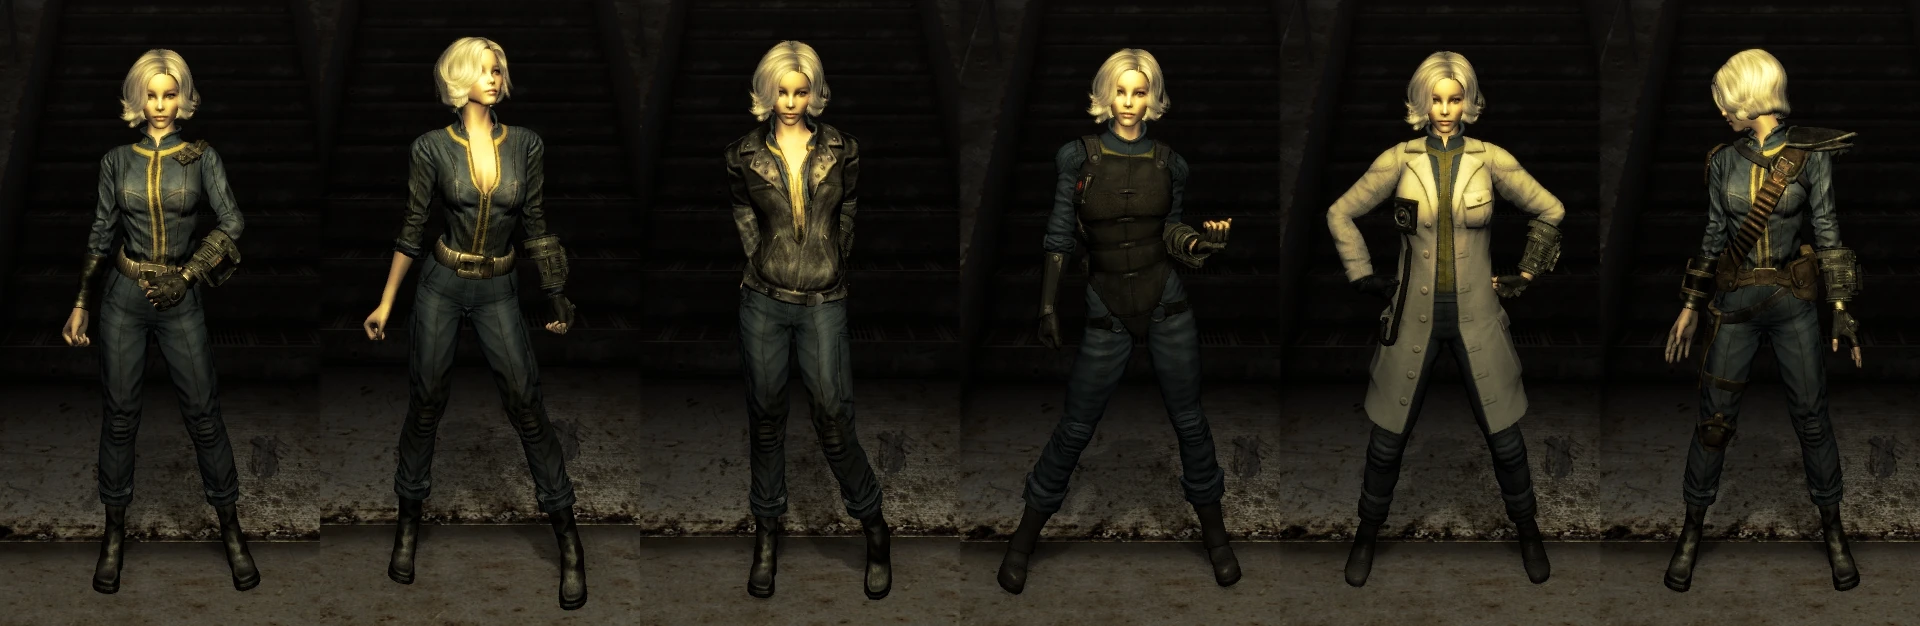 Fallout new vegas type 4 alternative outfits фото 8